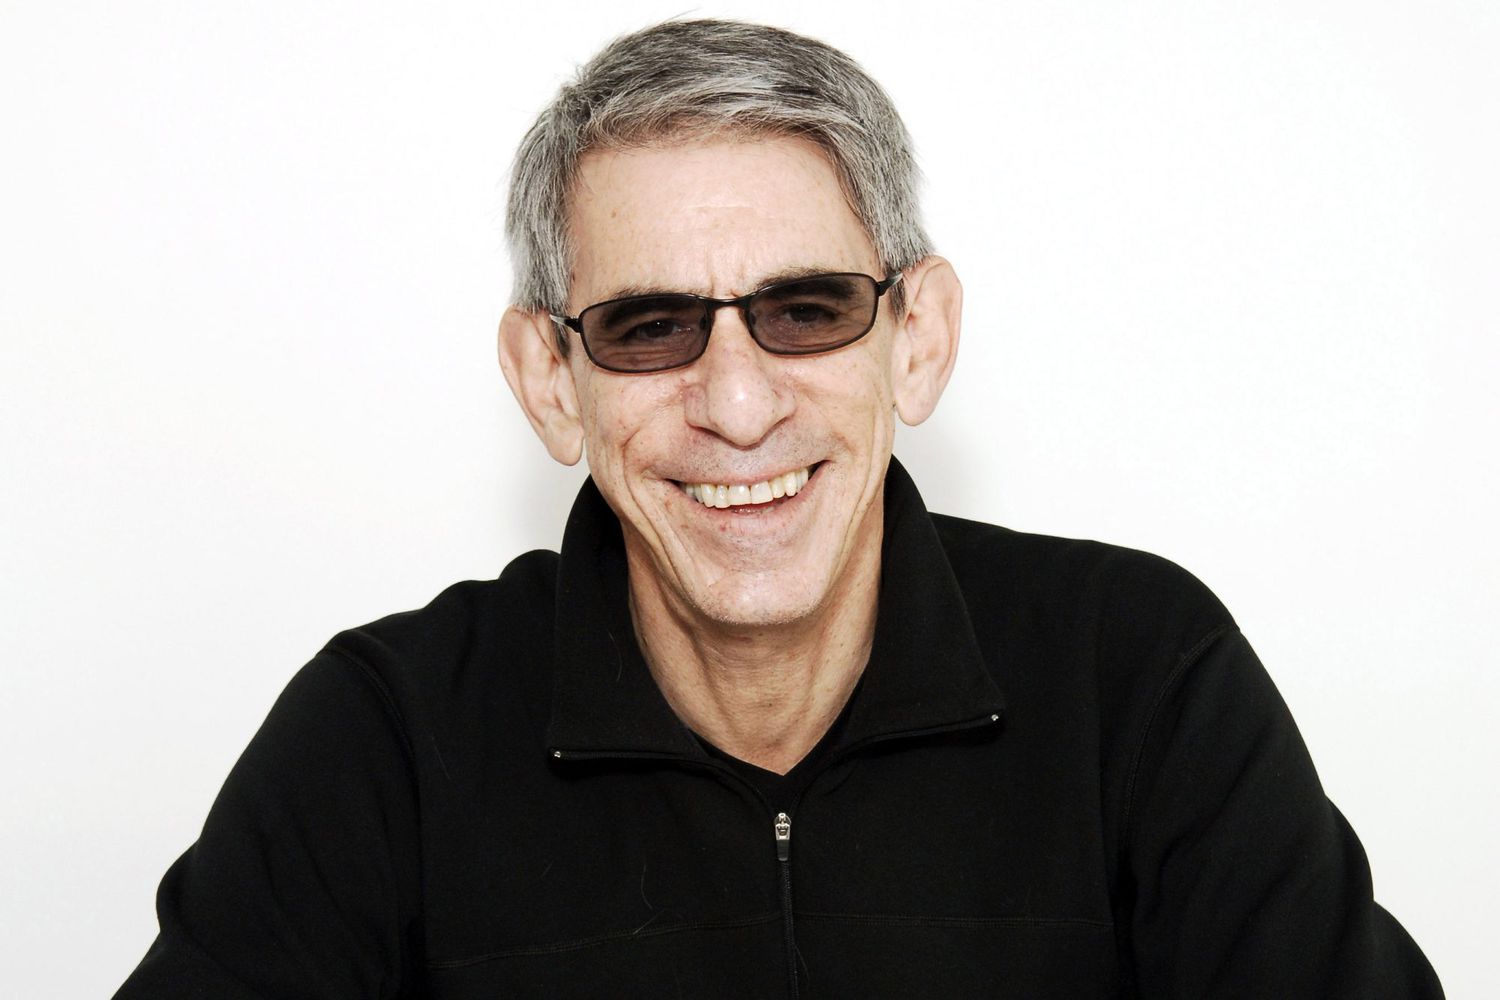 Richard Belzer, ‘Law & Order’ star and comedian, dies at 78